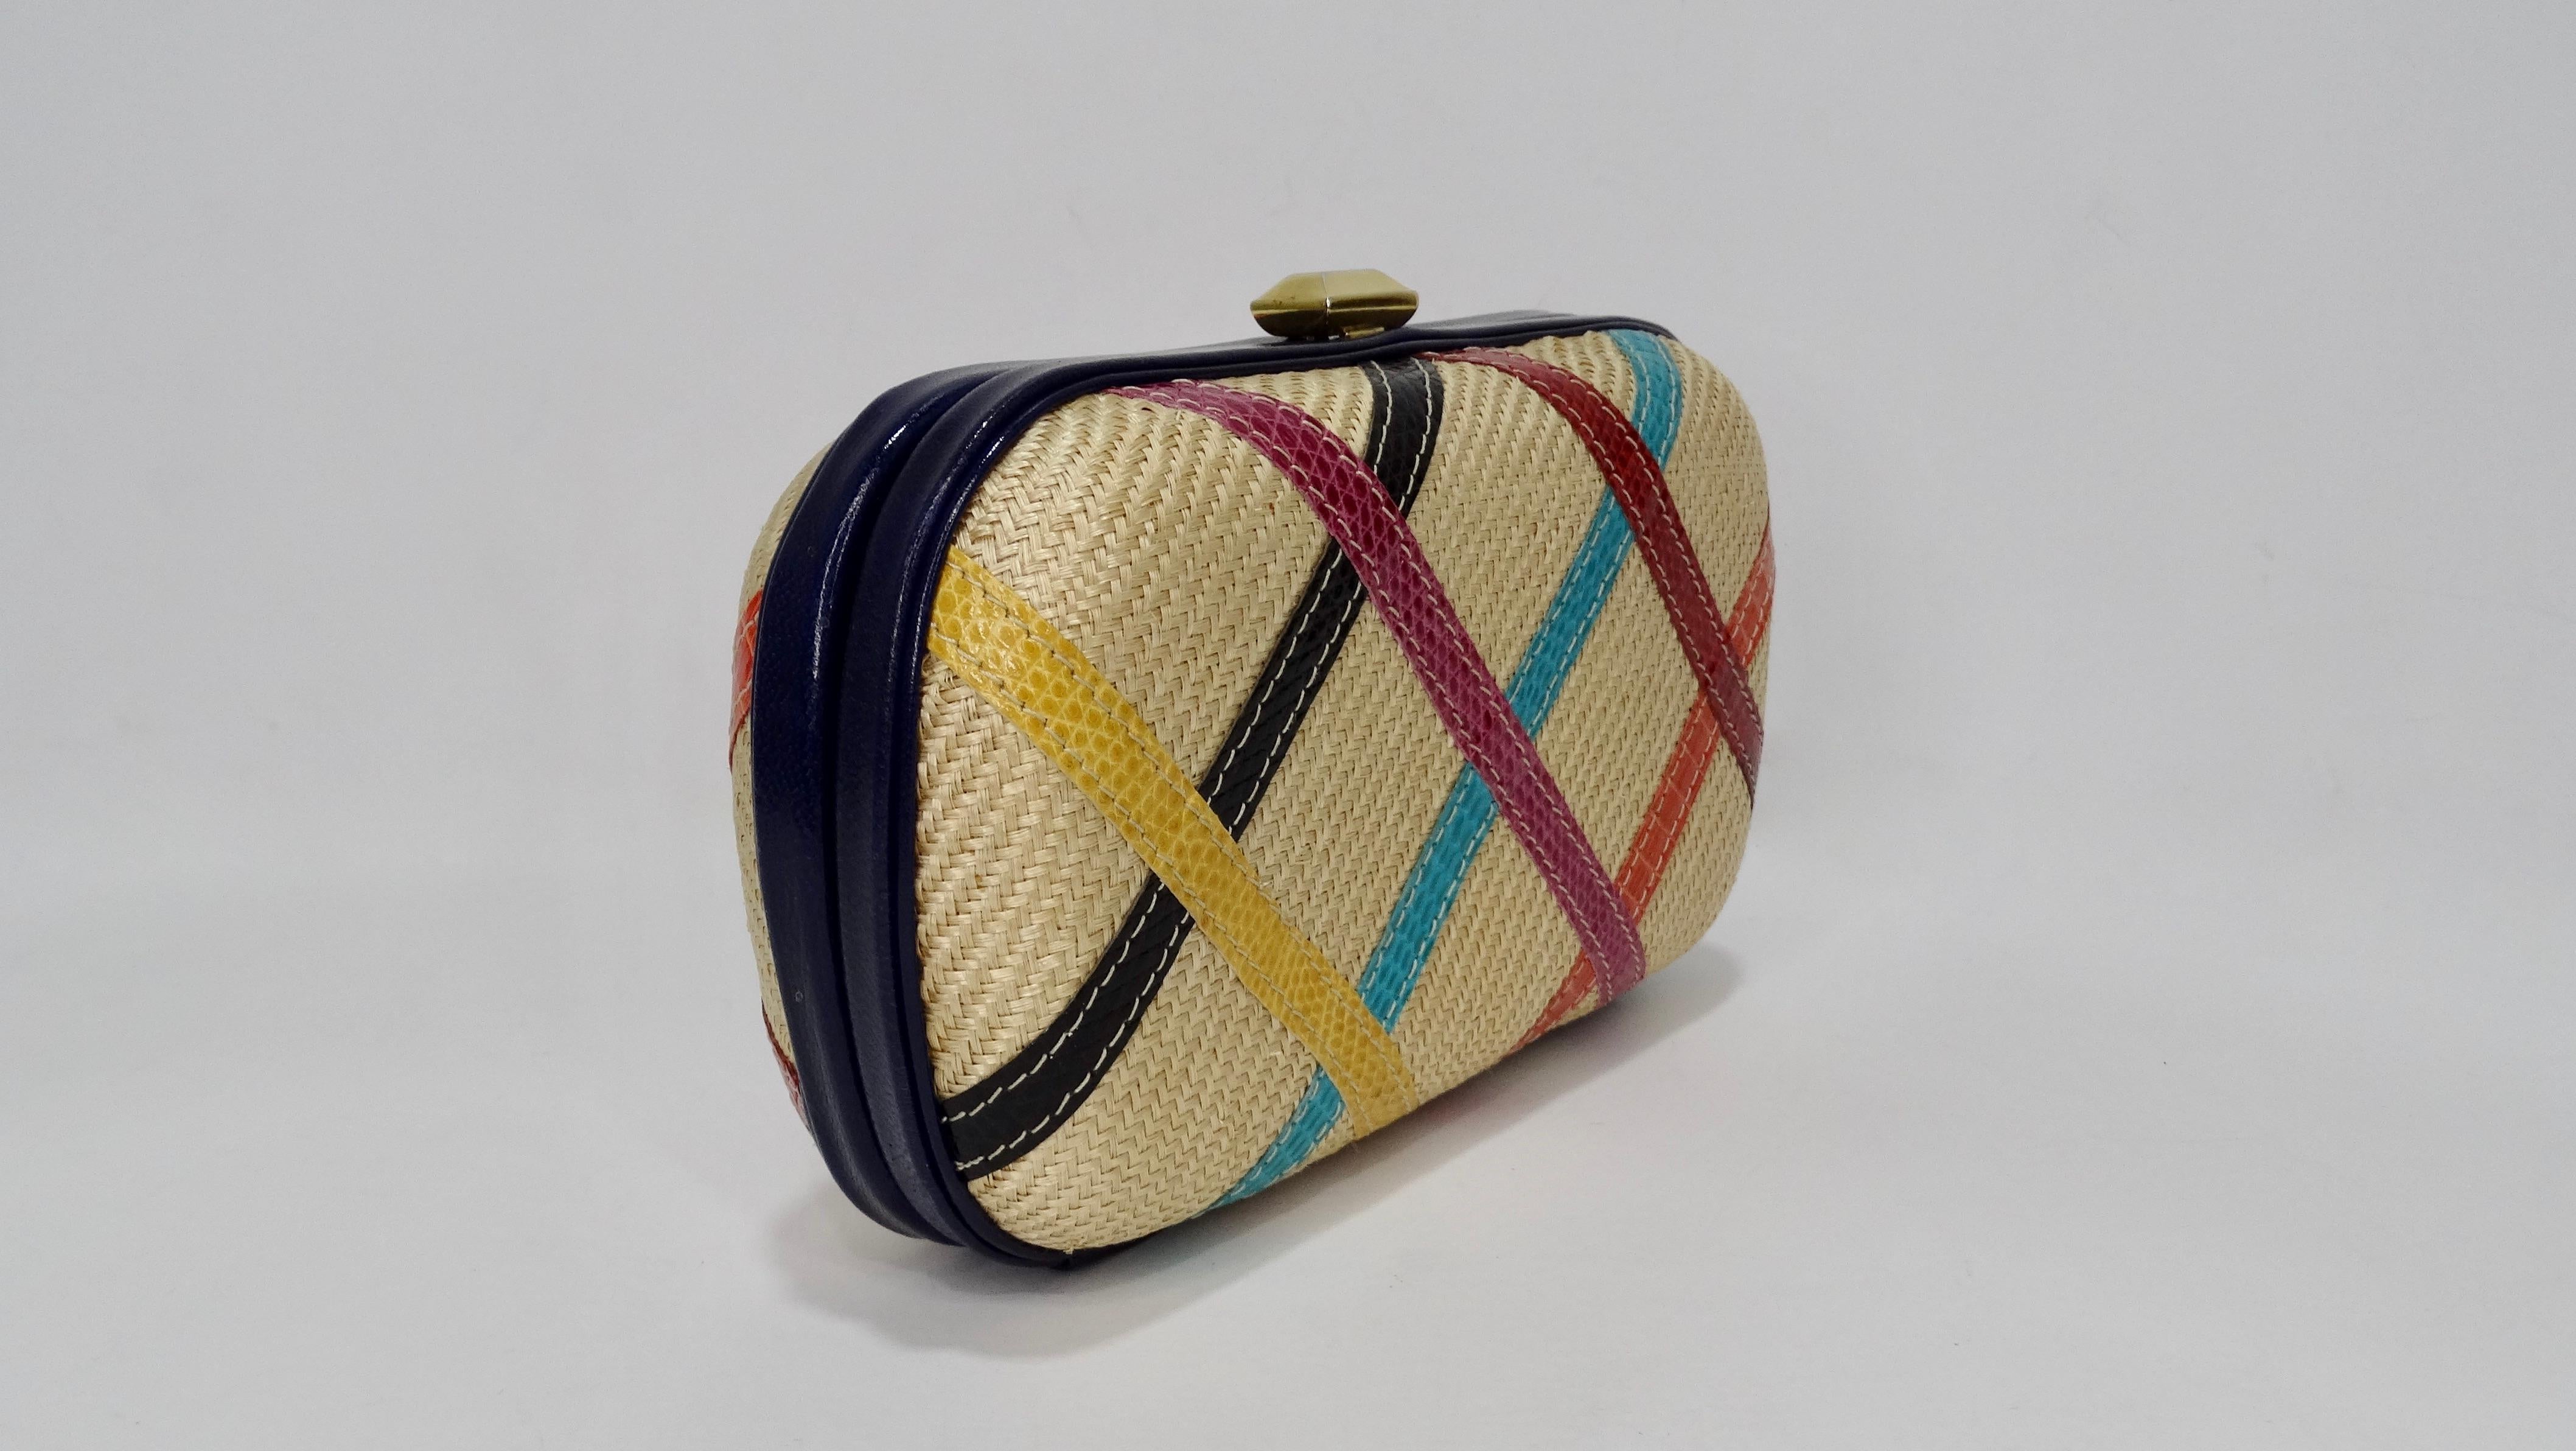 Add some vintage to your Summer/Spring looks! Circa 1970s, this Bottega clutch is crafted from woven raffia with a quilted pattern made from multi-colored leather. Navy blue leather trims the bag with a top clasp closure that opens to a champagne